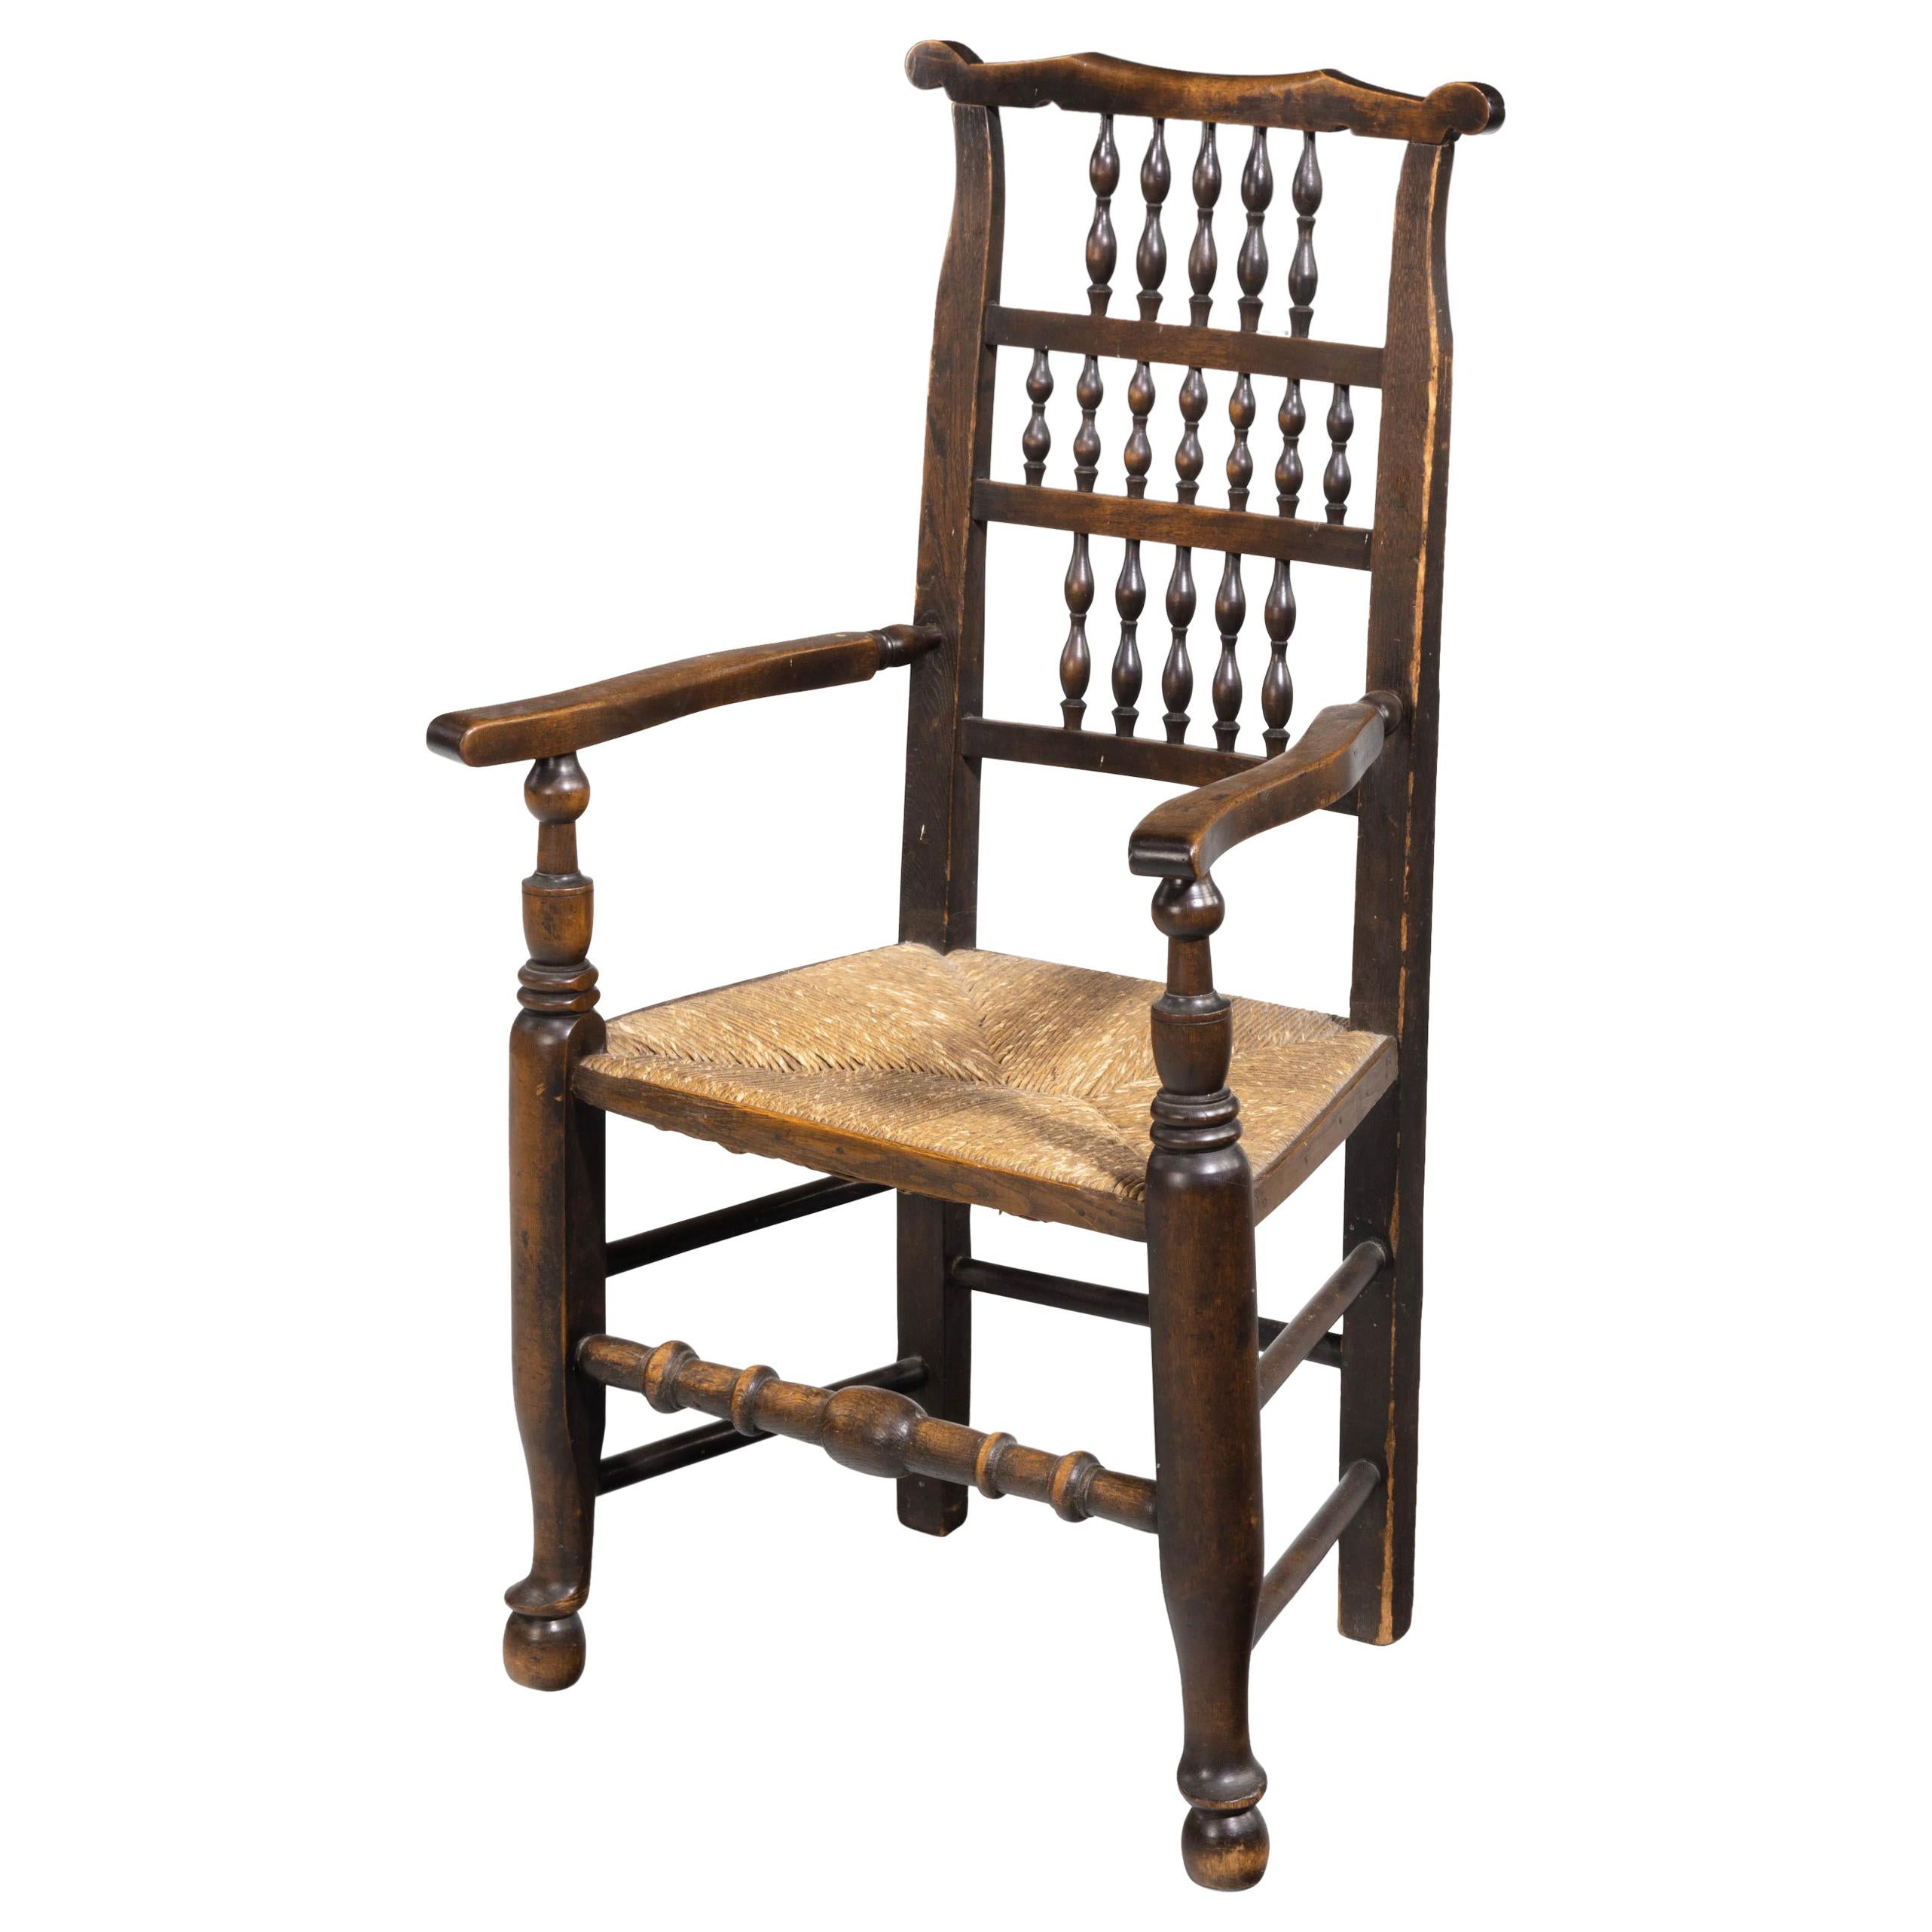 Attractive Mid-19th Century Elm Spindleback Armchair